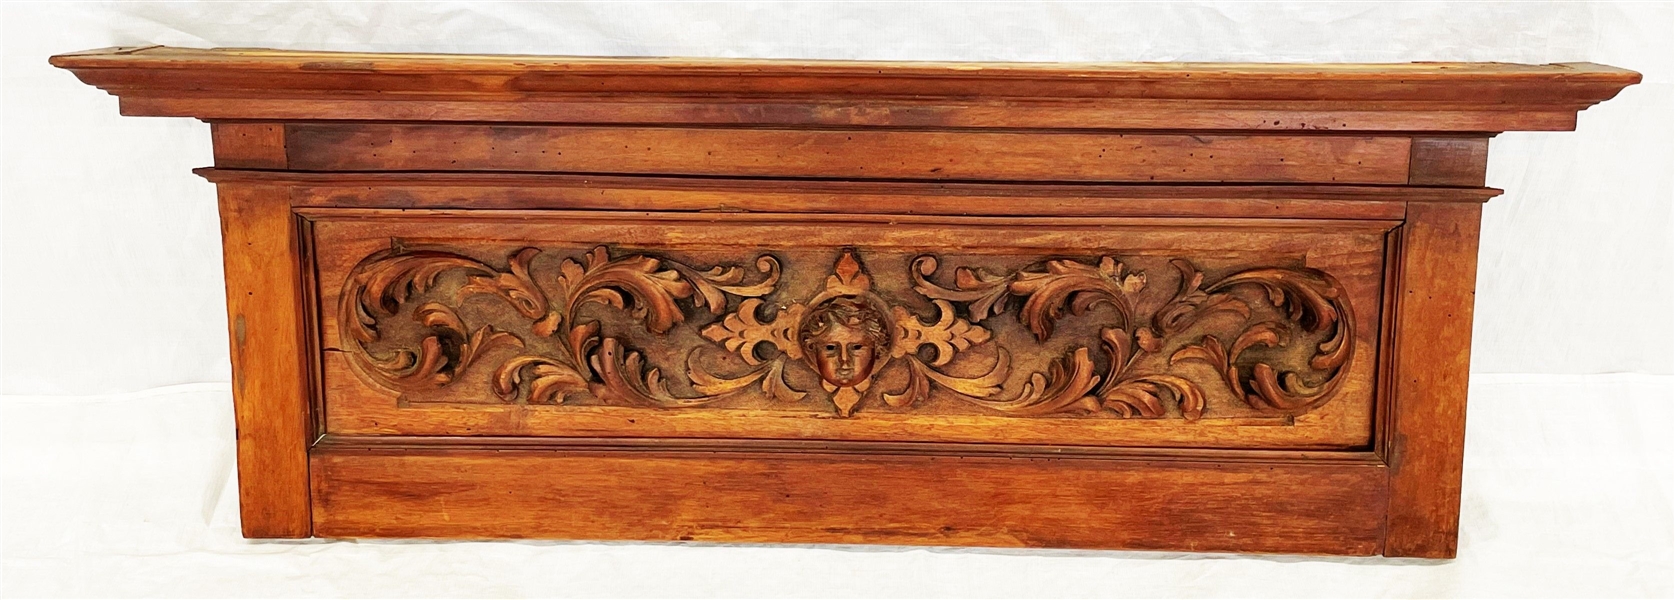 Carved Architecural Wood Panel High Relief Scrolls and Child Bust Center